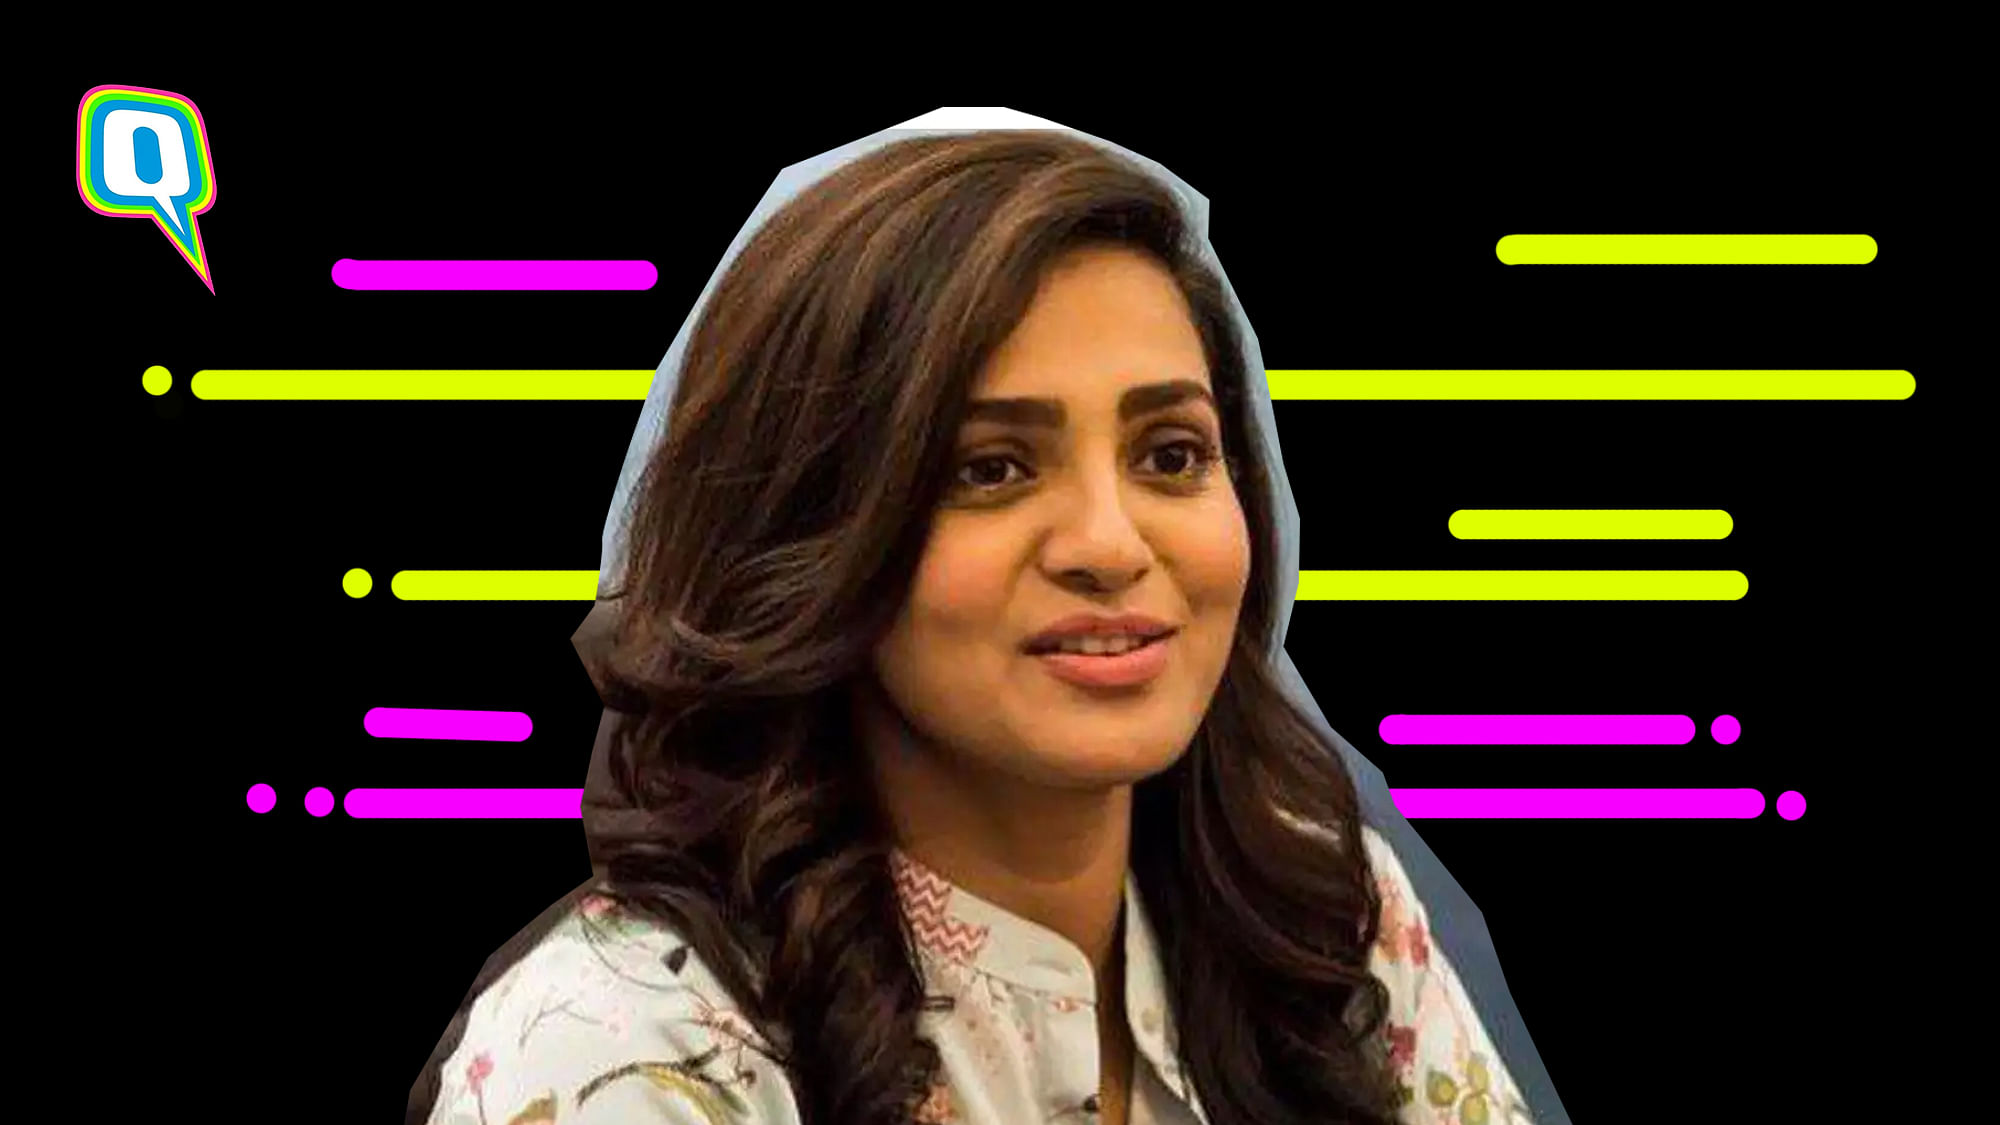 Parvathy is a force to reckon with.